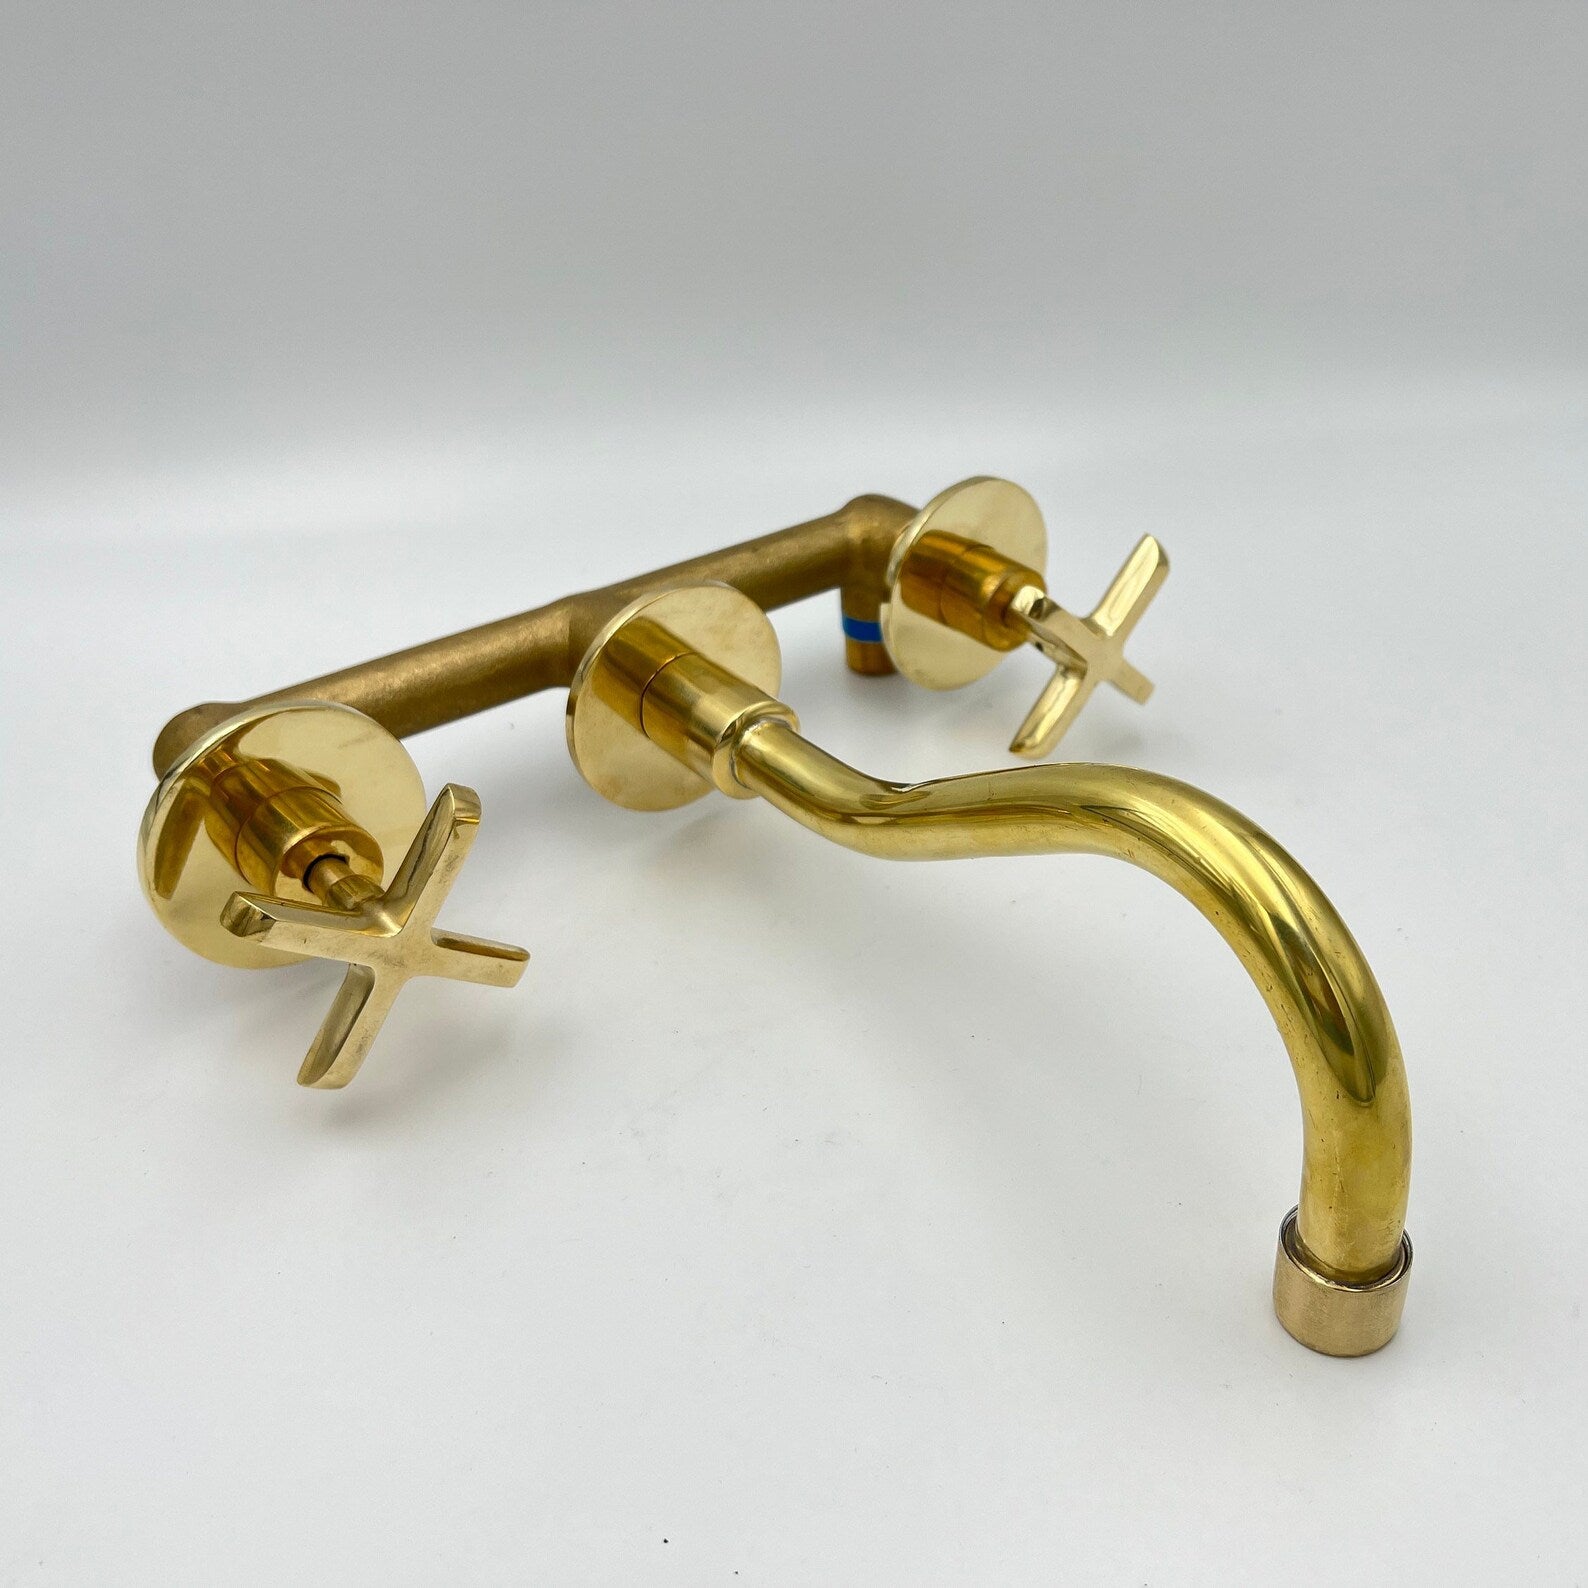 Brass Wall Mounted Faucet Bathroom With Curved Spout